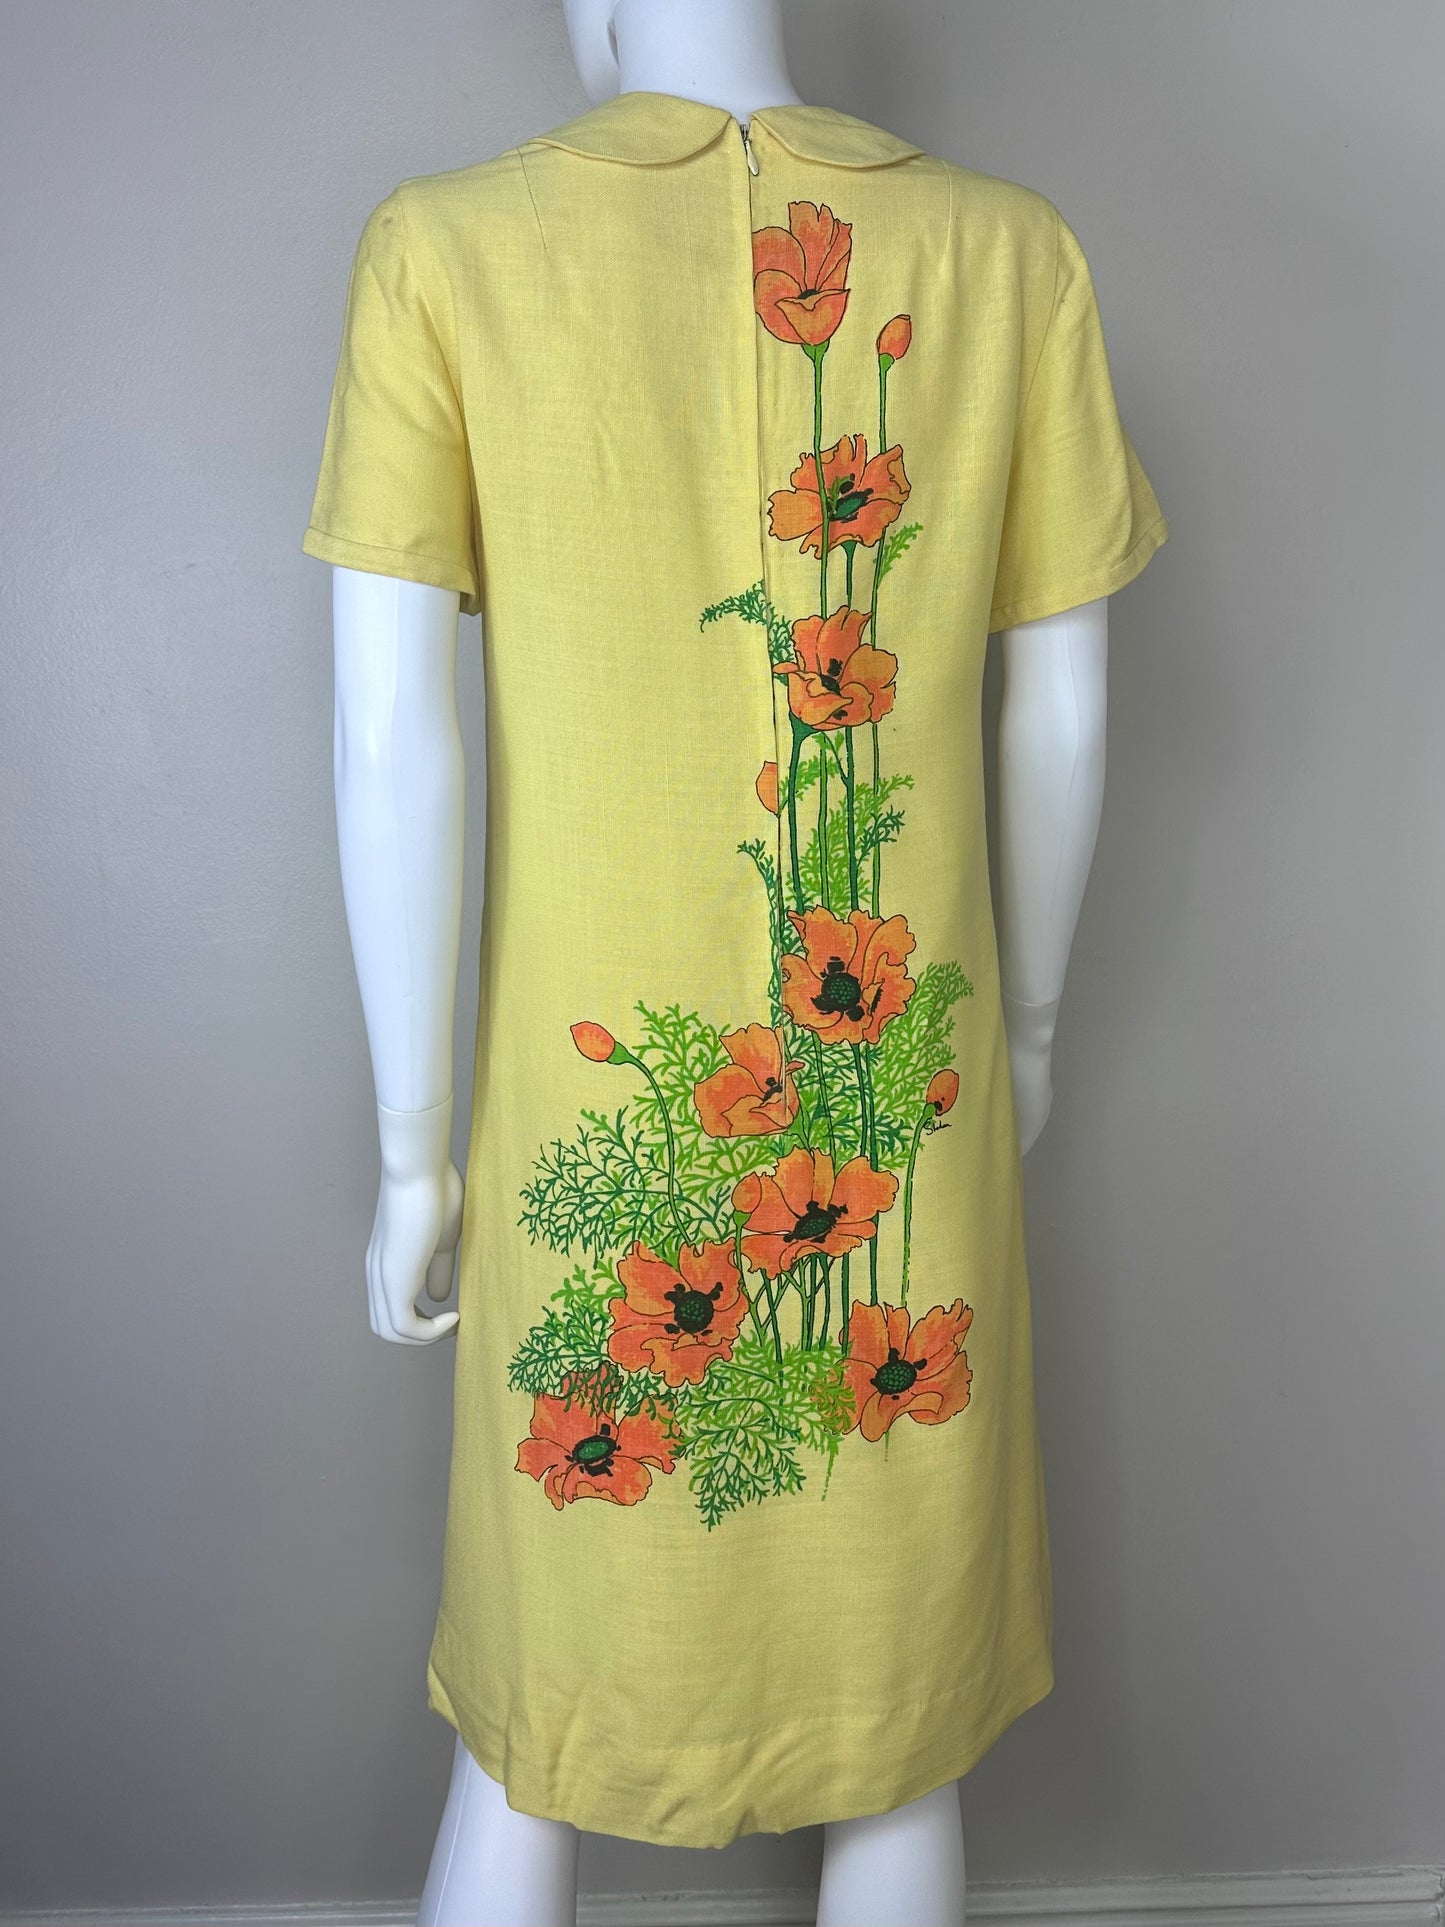 1970s Alfred Shaheen Yellow Floral Dress, Size S/M, Hand Printed in Hawaii, Handmade